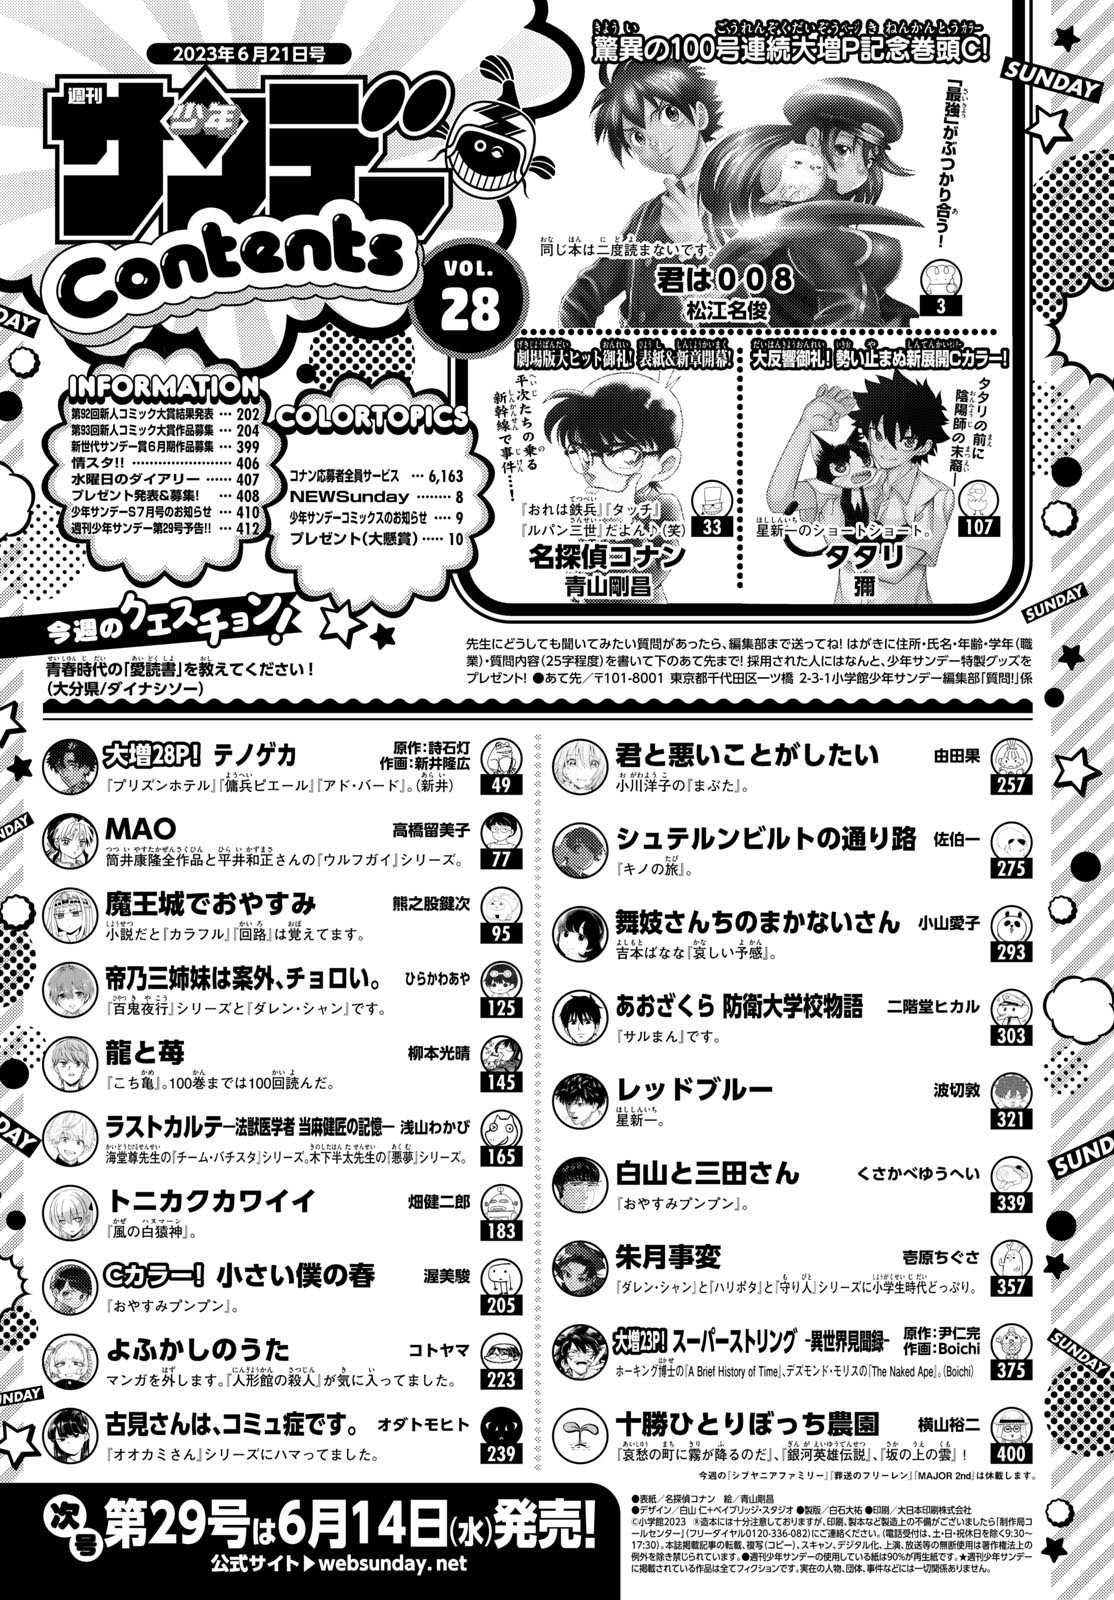 Weekly Shōnen Sunday - 週刊少年サンデー - Chapter 2023-28 - Page 2